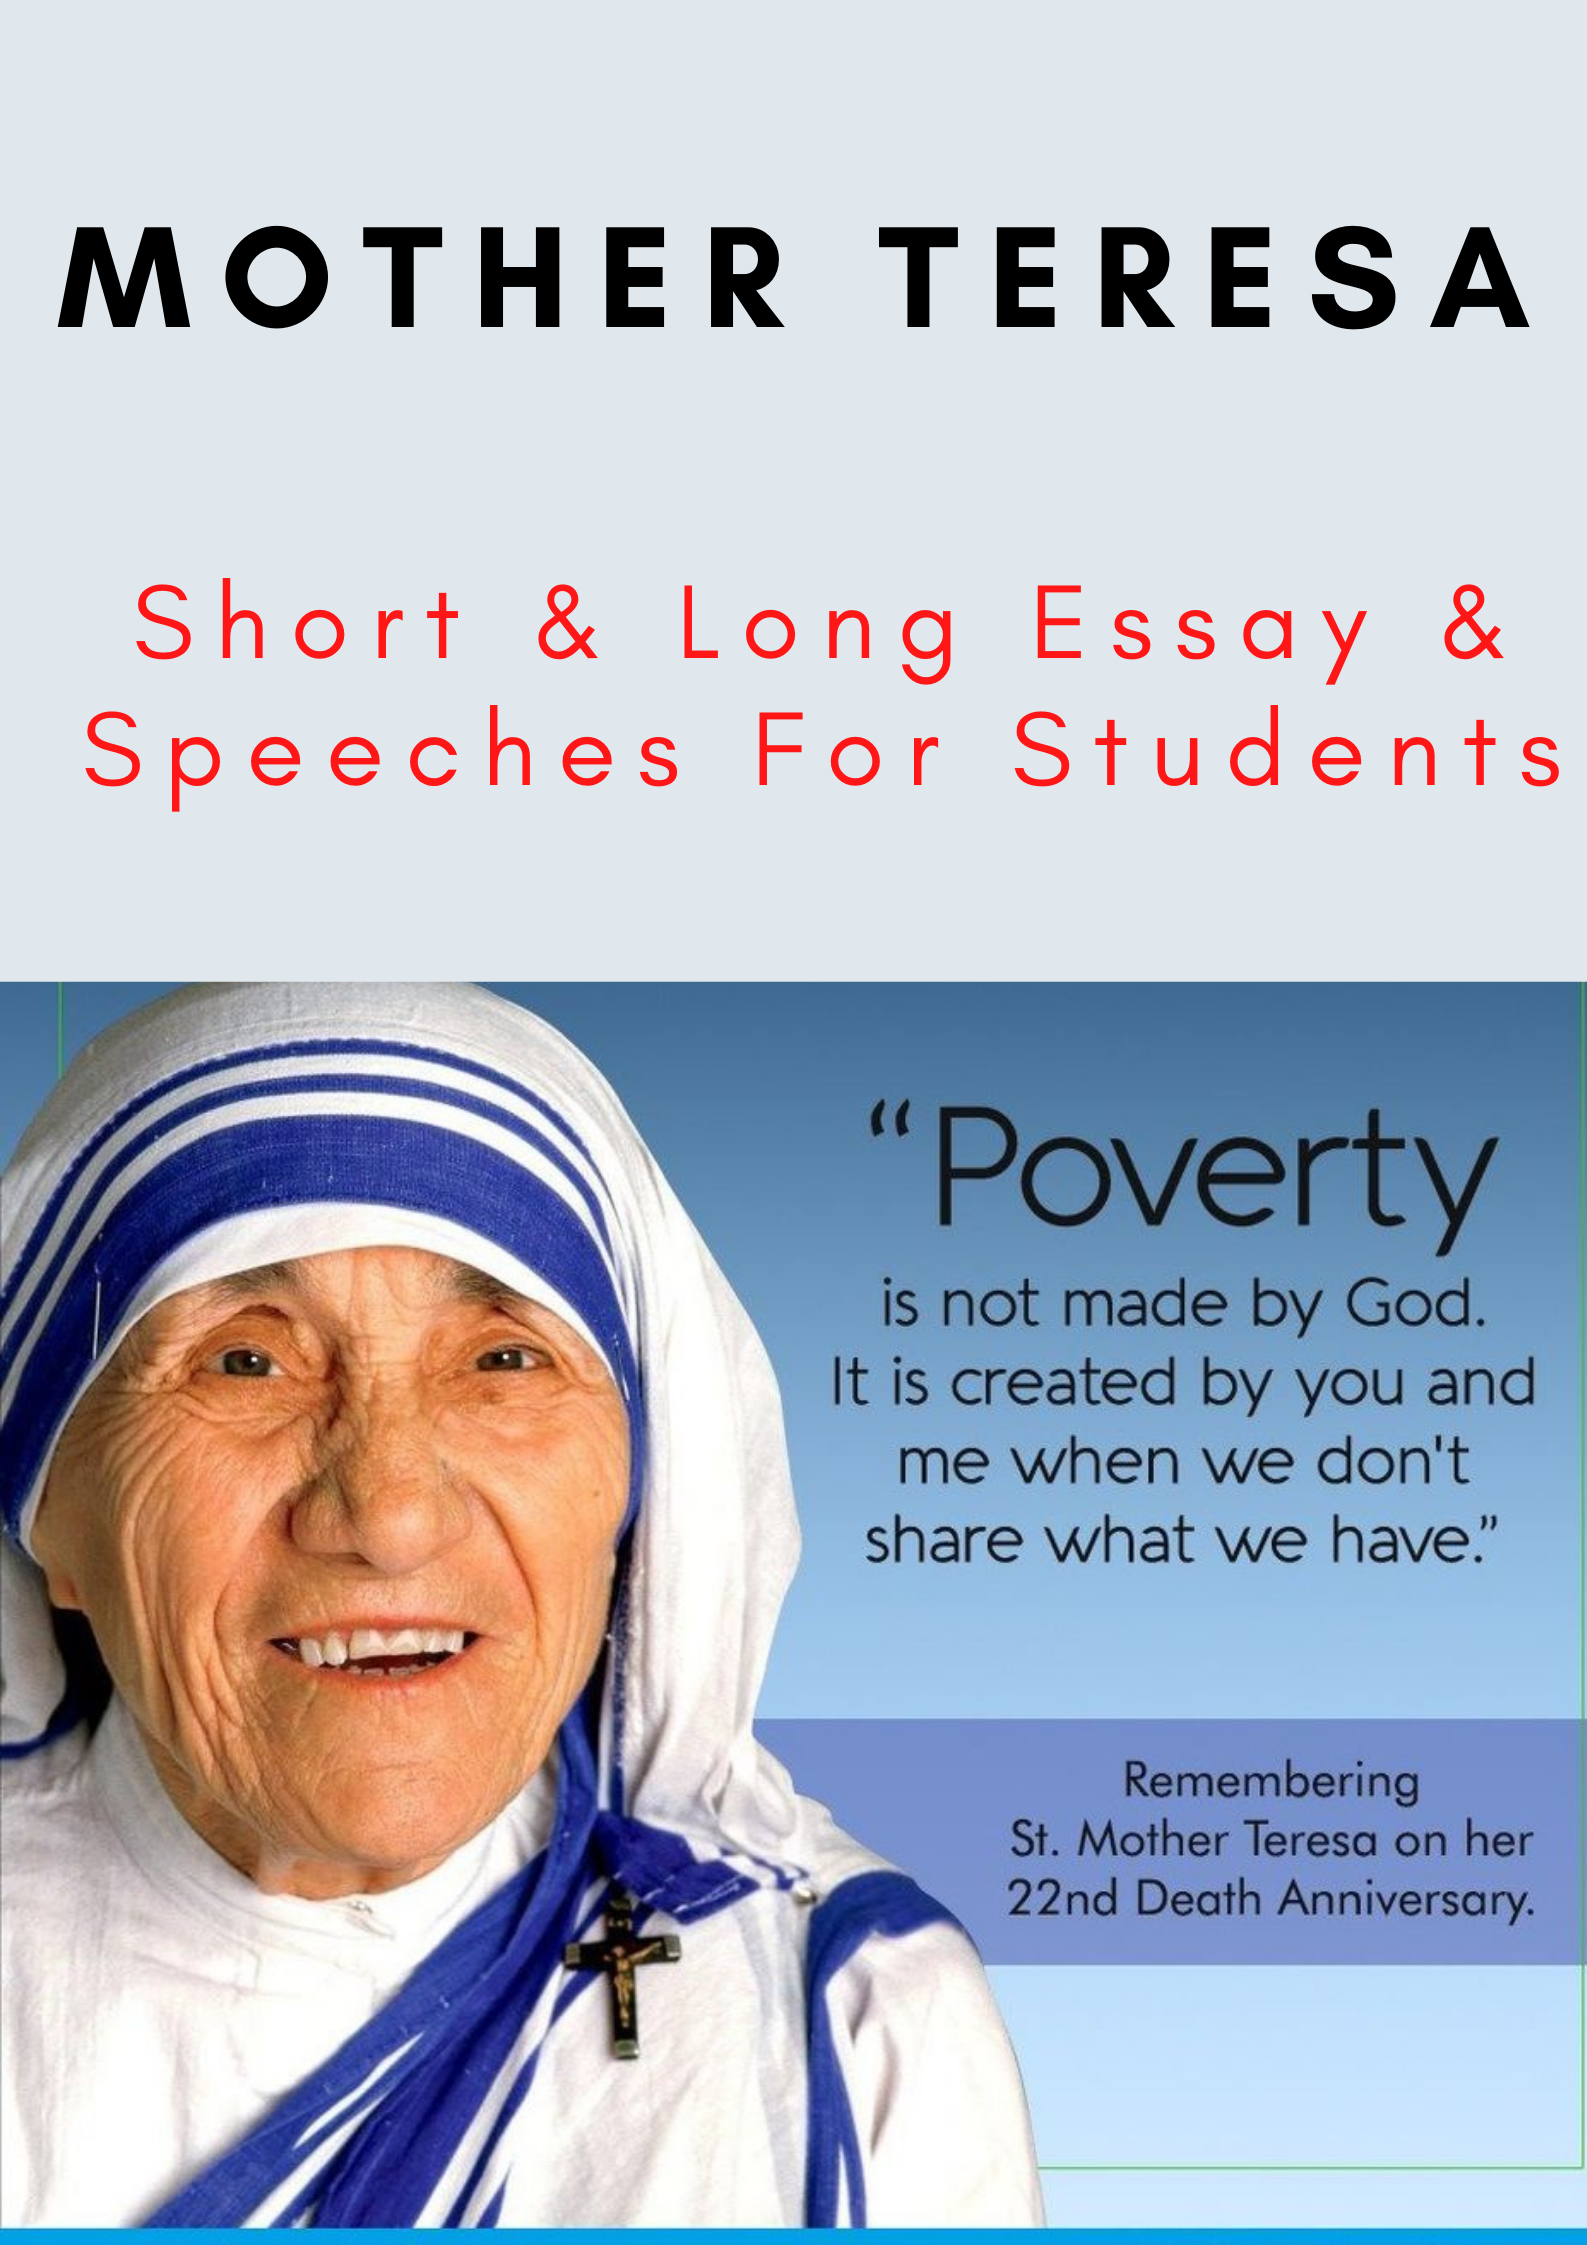 About mother teresa essay